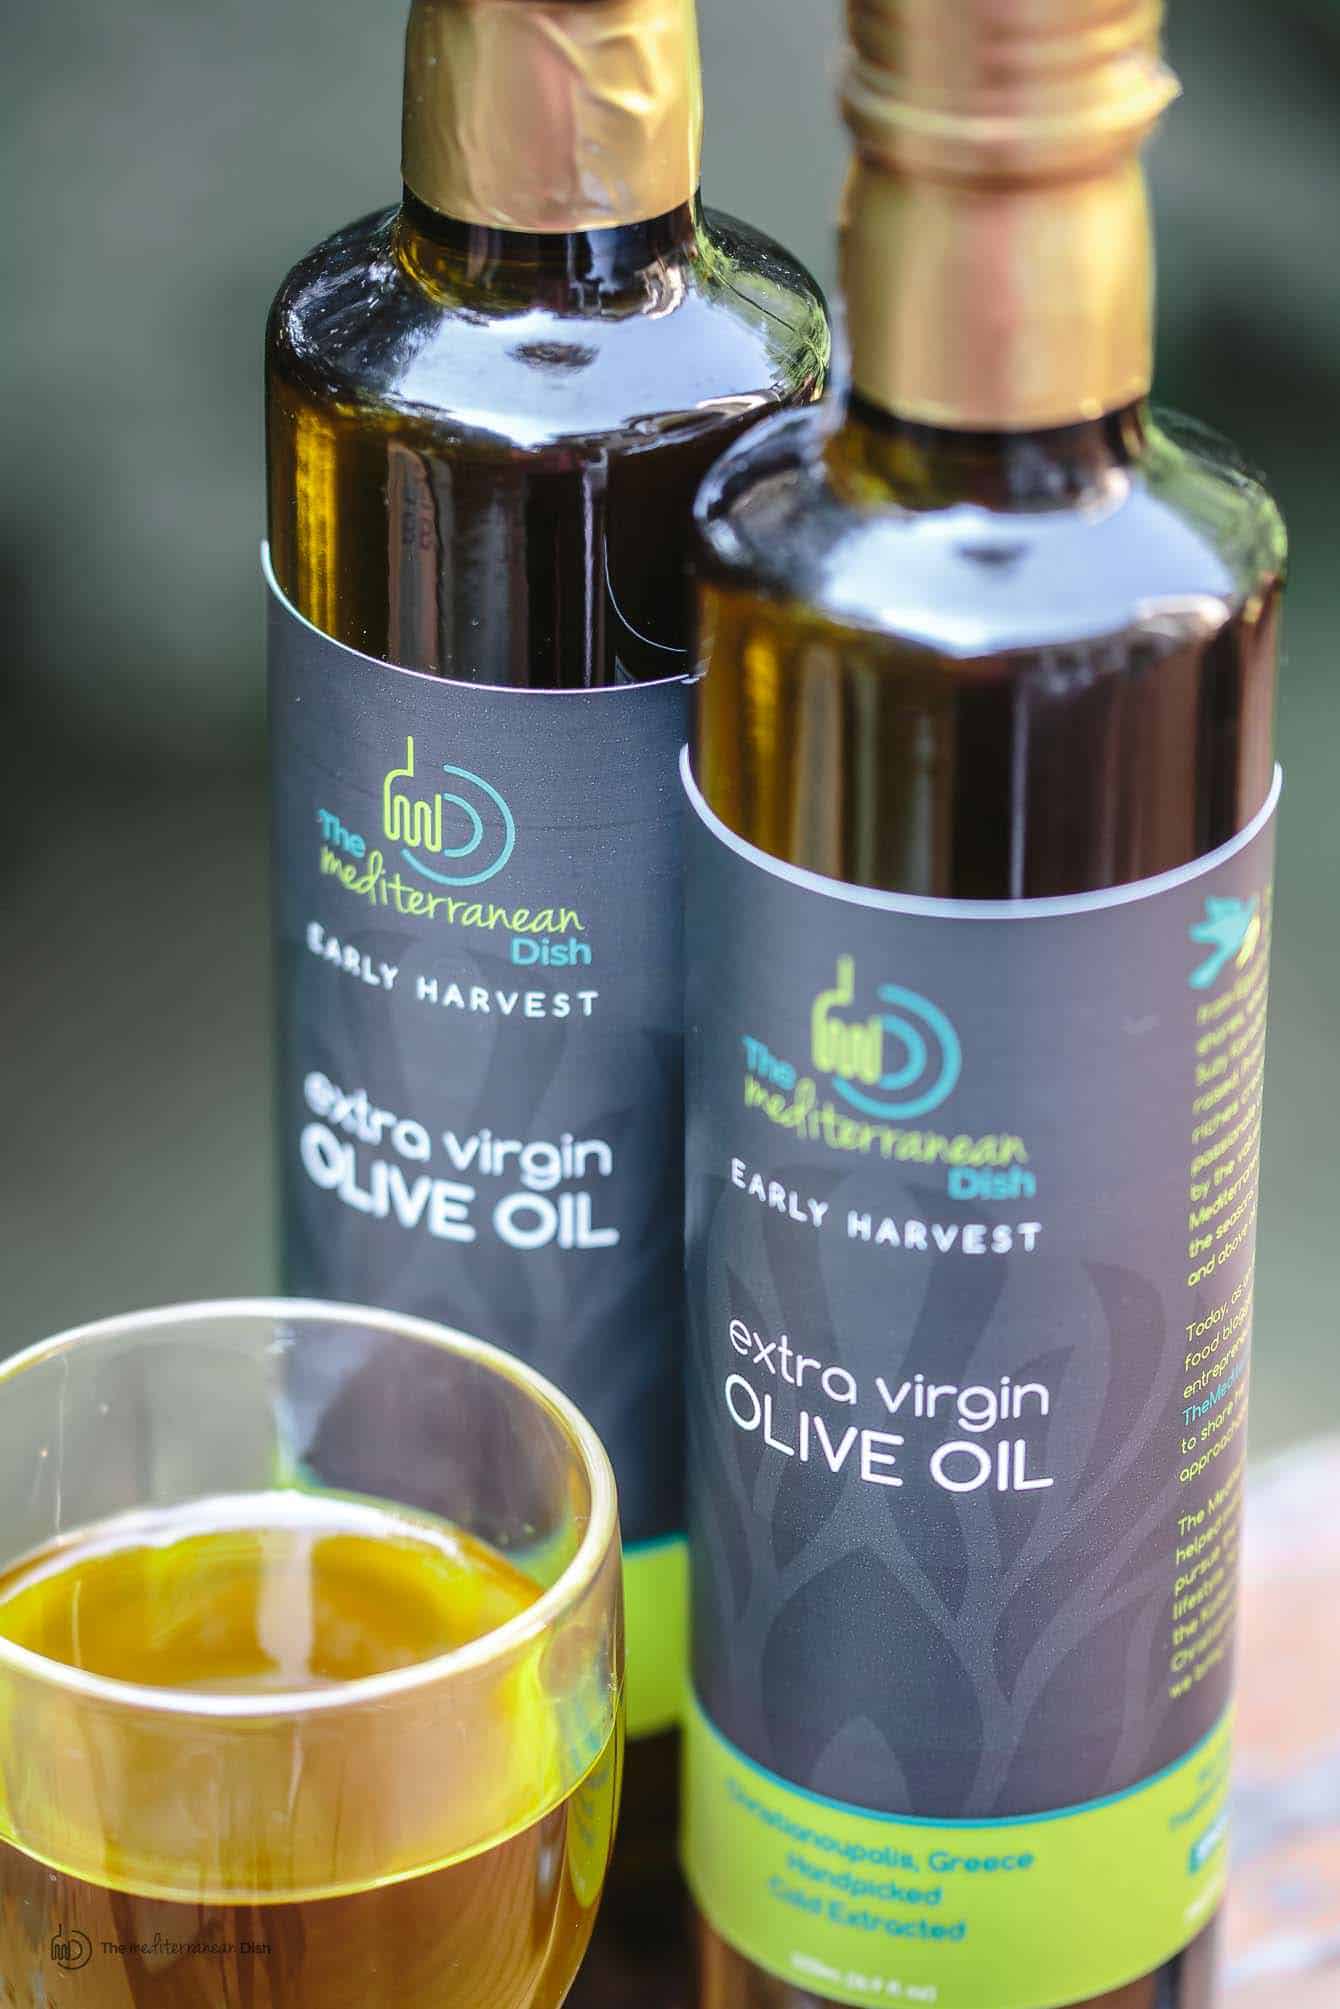 Extra Virgin Olive Oil Early Harvest by The Mediterranean Dish